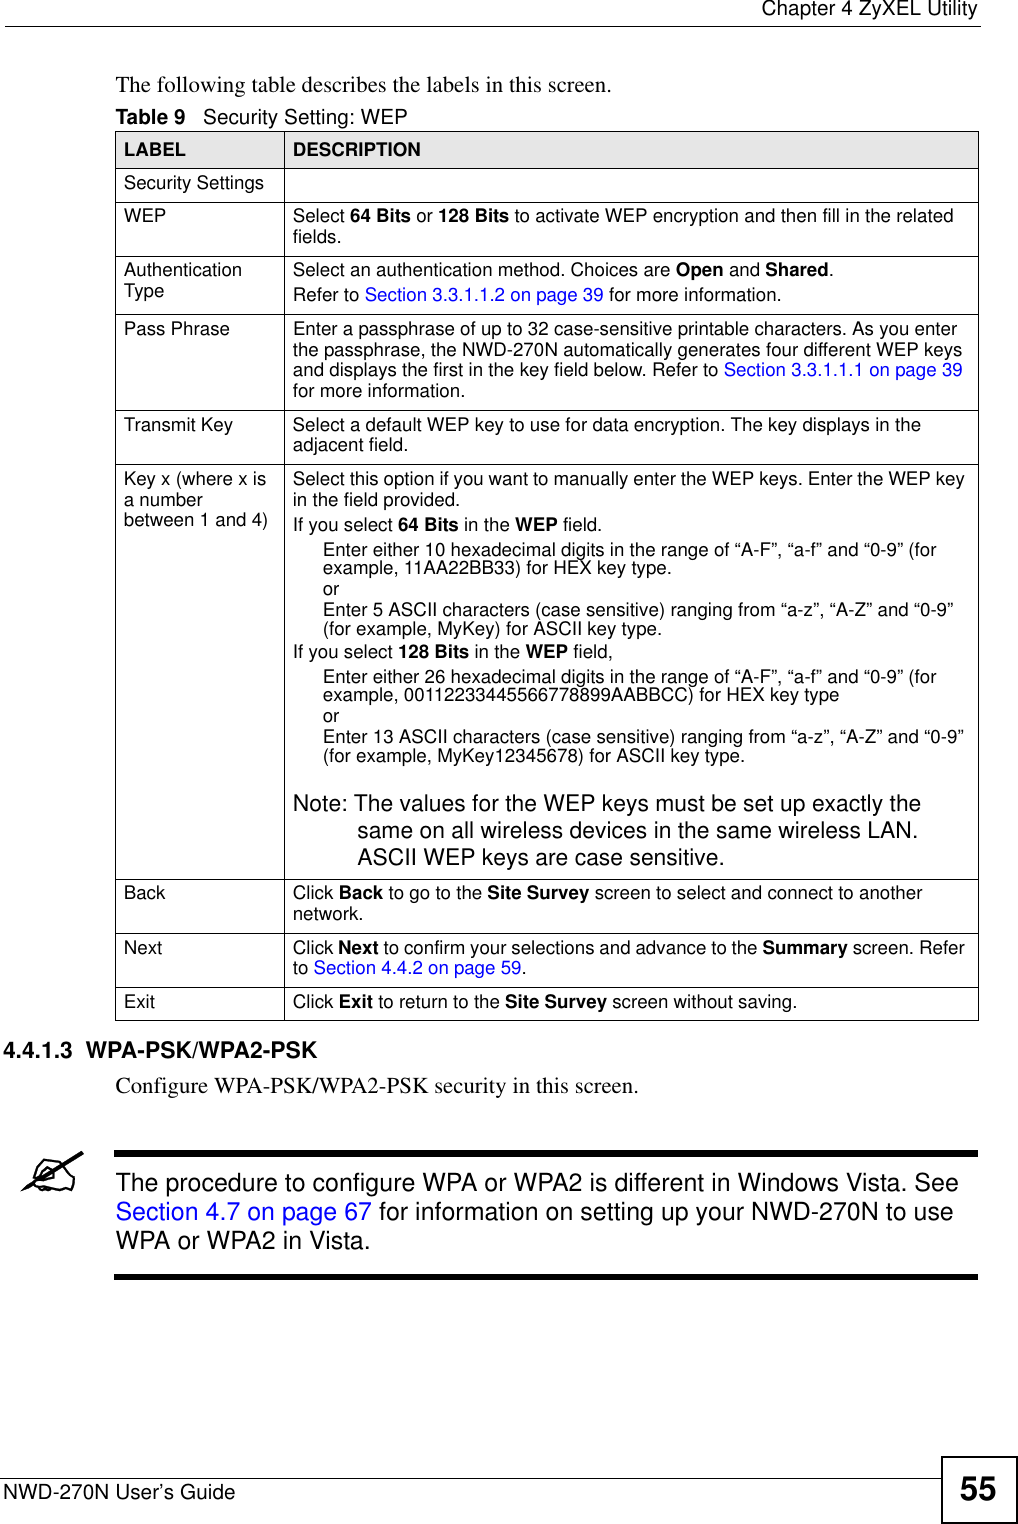  Chapter 4 ZyXEL UtilityNWD-270N User’s Guide 55The following table describes the labels in this screen.  4.4.1.3  WPA-PSK/WPA2-PSKConfigure WPA-PSK/WPA2-PSK security in this screen.&quot;The procedure to configure WPA or WPA2 is different in Windows Vista. See Section 4.7 on page 67 for information on setting up your NWD-270N to use WPA or WPA2 in Vista.Table 9   Security Setting: WEP LABEL DESCRIPTIONSecurity SettingsWEP Select 64 Bits or 128 Bits to activate WEP encryption and then fill in the related fields.Authentication Type Select an authentication method. Choices are Open and Shared.Refer to Section 3.3.1.1.2 on page 39 for more information.Pass Phrase Enter a passphrase of up to 32 case-sensitive printable characters. As you enter the passphrase, the NWD-270N automatically generates four different WEP keys and displays the first in the key field below. Refer to Section 3.3.1.1.1 on page 39 for more information.Transmit Key Select a default WEP key to use for data encryption. The key displays in the adjacent field.Key x (where x is a number between 1 and 4)Select this option if you want to manually enter the WEP keys. Enter the WEP key in the field provided.If you select 64 Bits in the WEP field.Enter either 10 hexadecimal digits in the range of “A-F”, “a-f” and “0-9” (for example, 11AA22BB33) for HEX key type.orEnter 5 ASCII characters (case sensitive) ranging from “a-z”, “A-Z” and “0-9” (for example, MyKey) for ASCII key type. If you select 128 Bits in the WEP field,Enter either 26 hexadecimal digits in the range of “A-F”, “a-f” and “0-9” (for example, 00112233445566778899AABBCC) for HEX key typeorEnter 13 ASCII characters (case sensitive) ranging from “a-z”, “A-Z” and “0-9” (for example, MyKey12345678) for ASCII key type.Note: The values for the WEP keys must be set up exactly the same on all wireless devices in the same wireless LAN. ASCII WEP keys are case sensitive.Back Click Back to go to the Site Survey screen to select and connect to another network.Next Click Next to confirm your selections and advance to the Summary screen. Refer to Section 4.4.2 on page 59. Exit Click Exit to return to the Site Survey screen without saving.